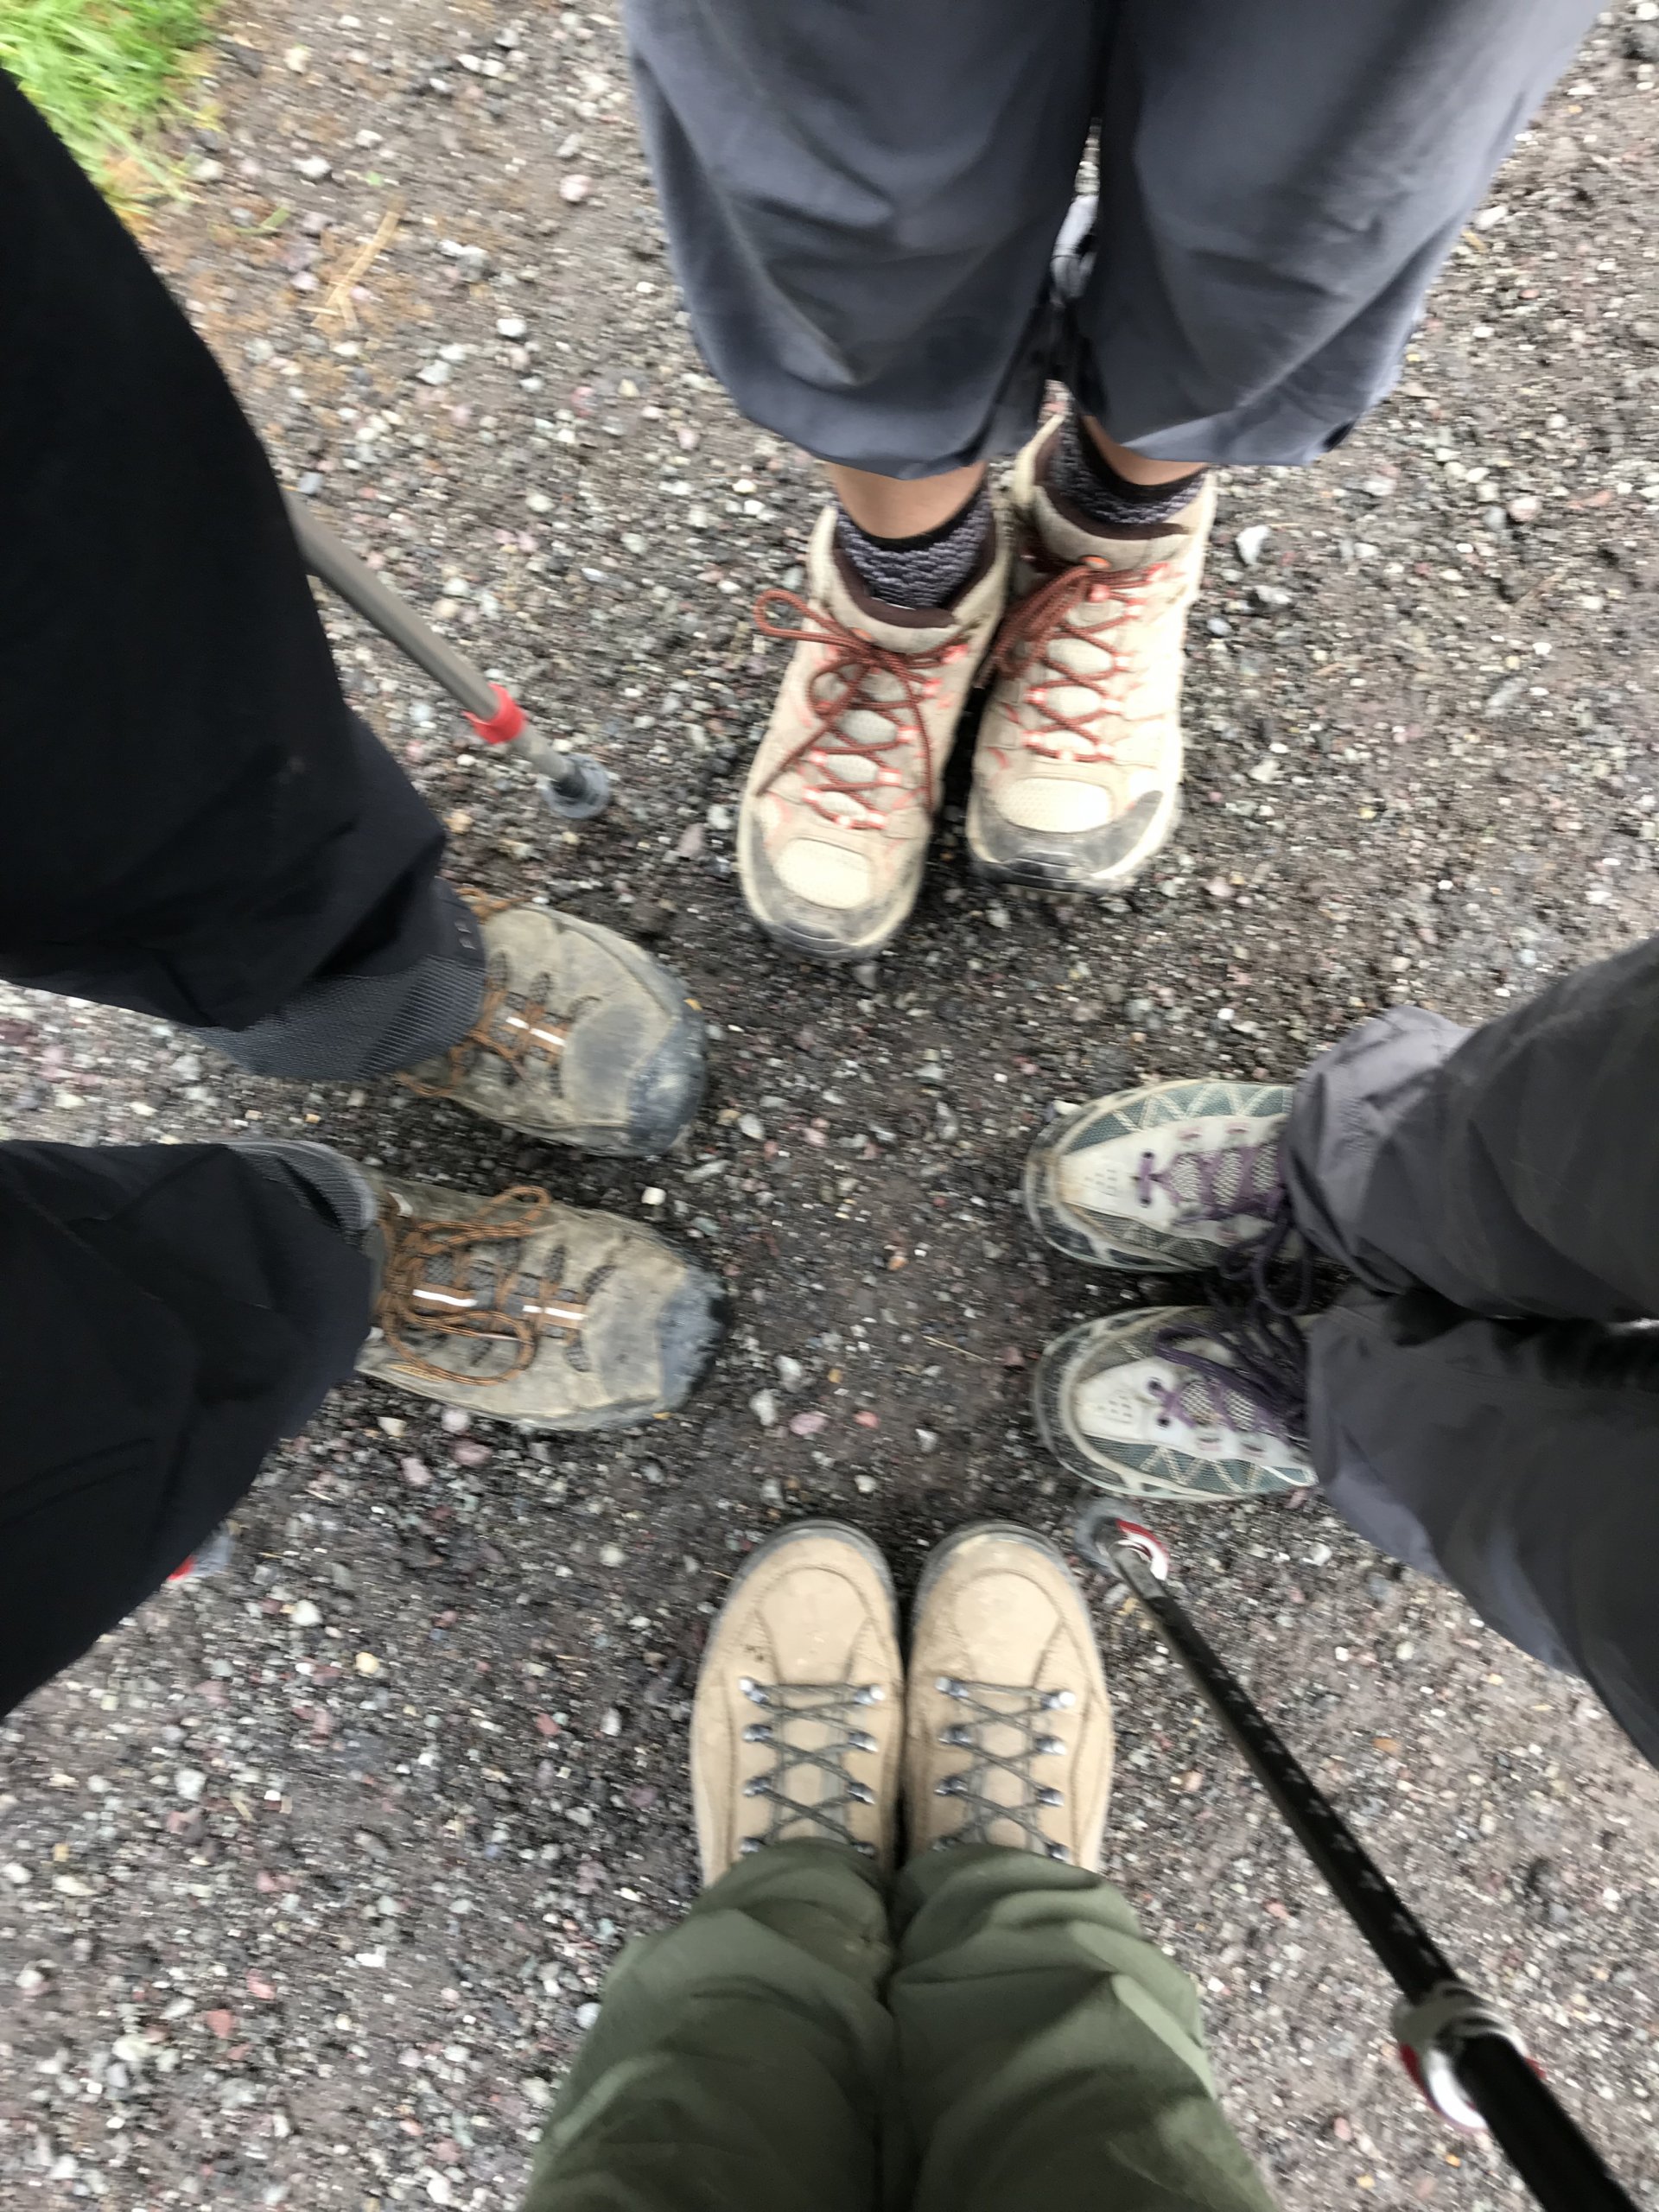 Our partners - the hiking boots.